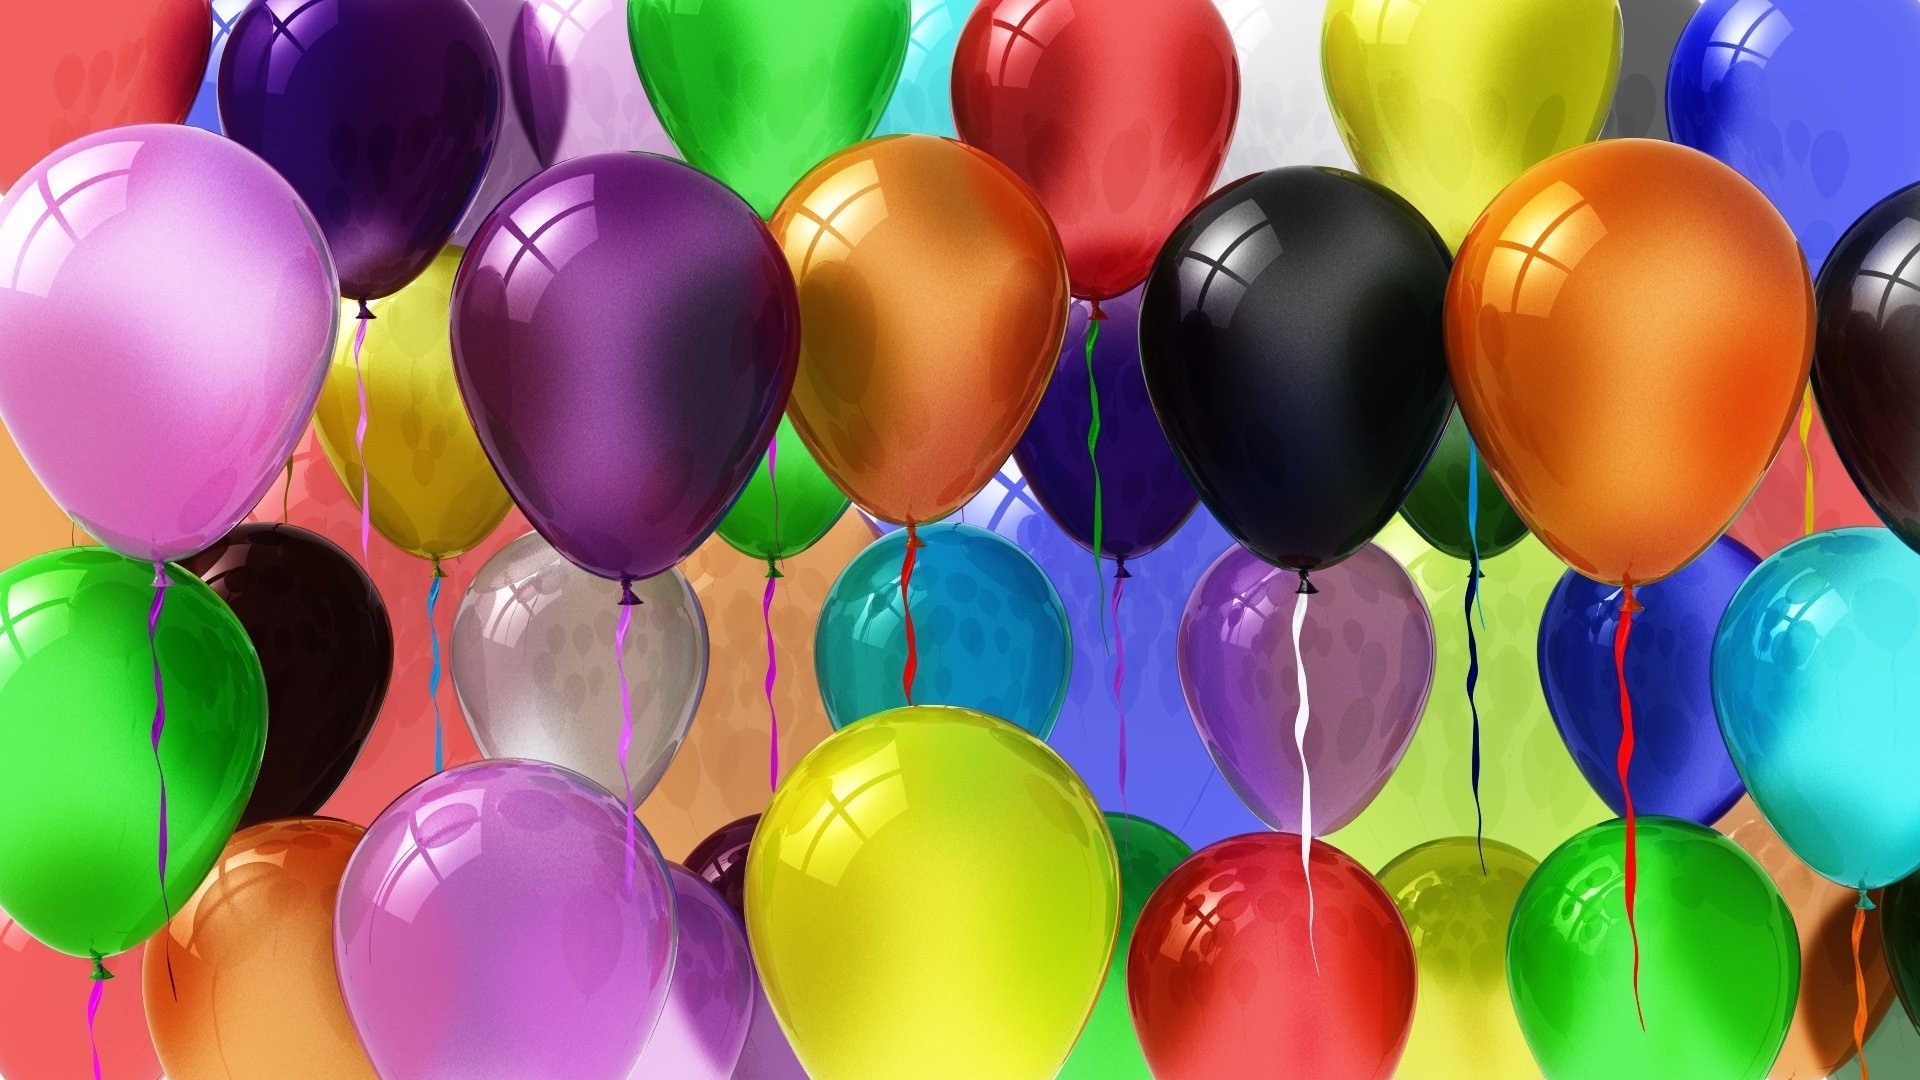 Colorful balloons  Phone wallpapers 